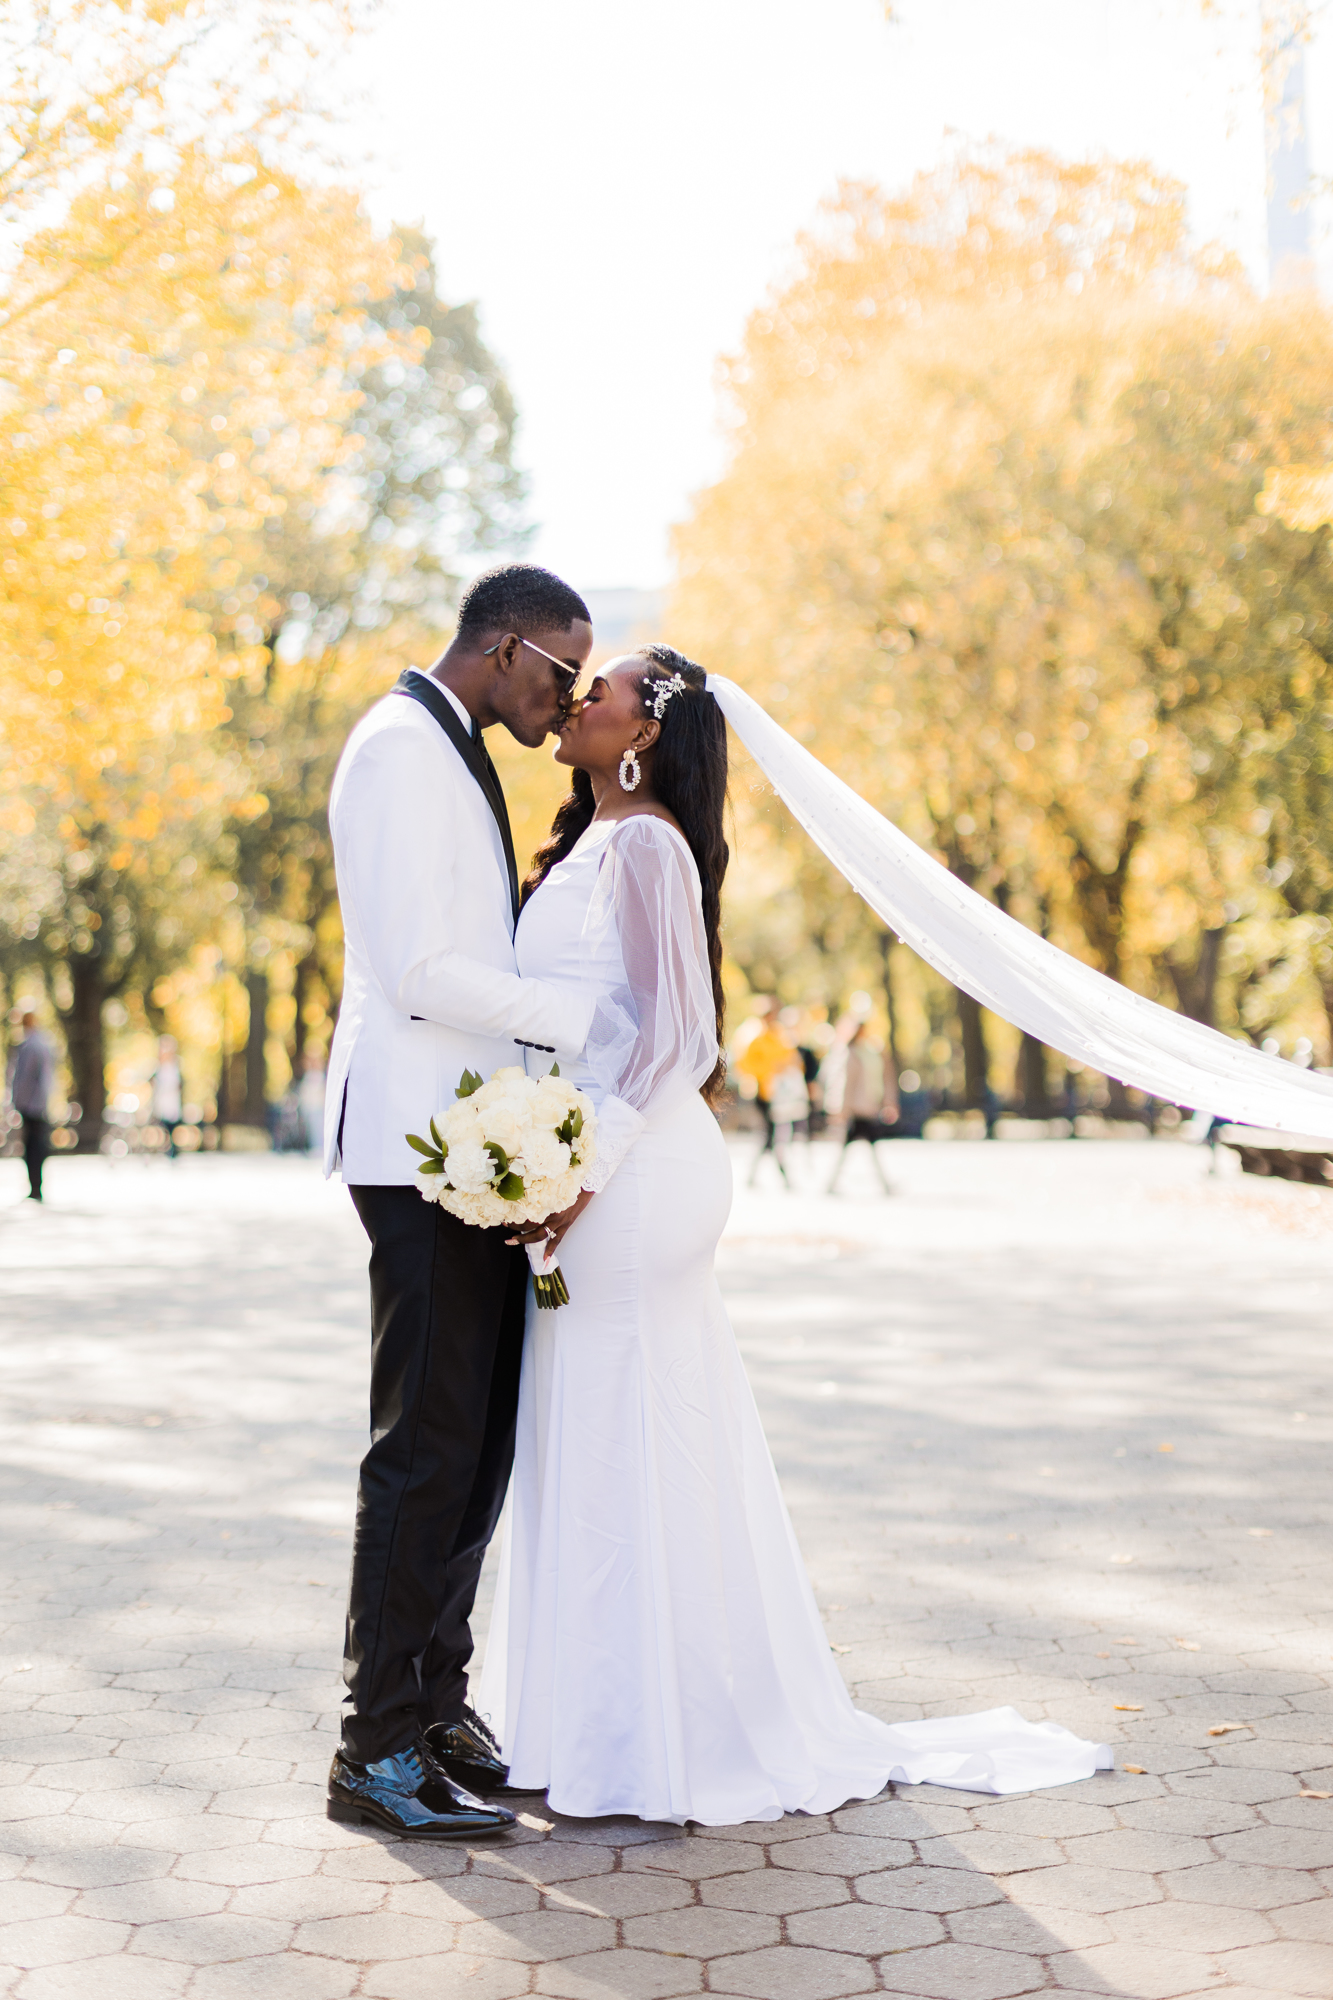 Flawless Central Park Wedding Photos on Cherry Hill in Fall